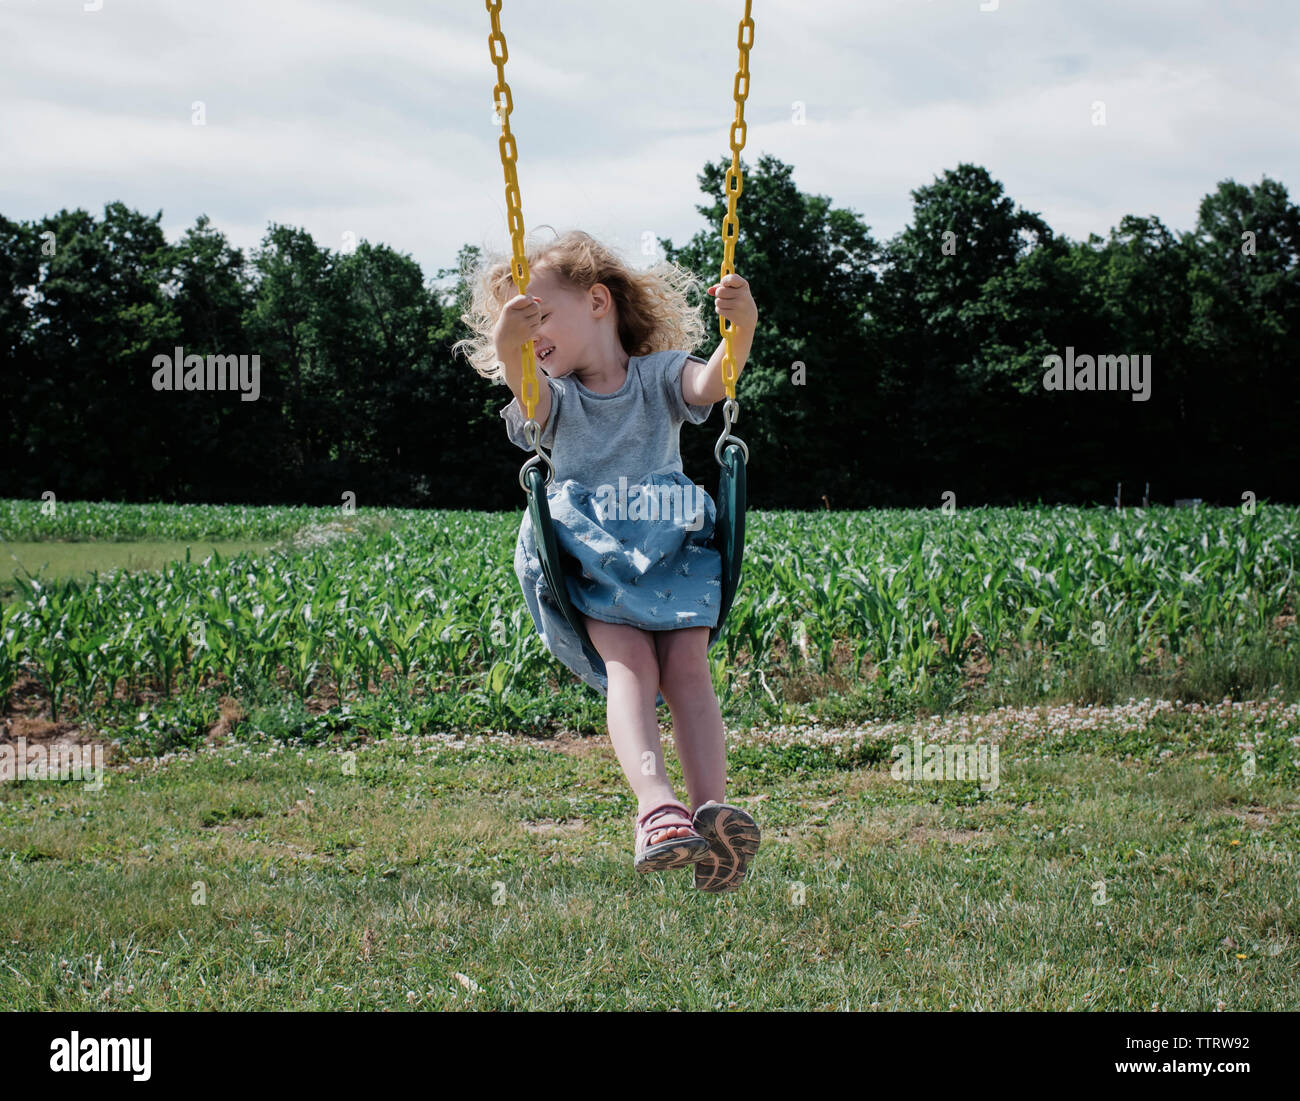 Happy girl swinging against sky at park during sunny day Stock Photo